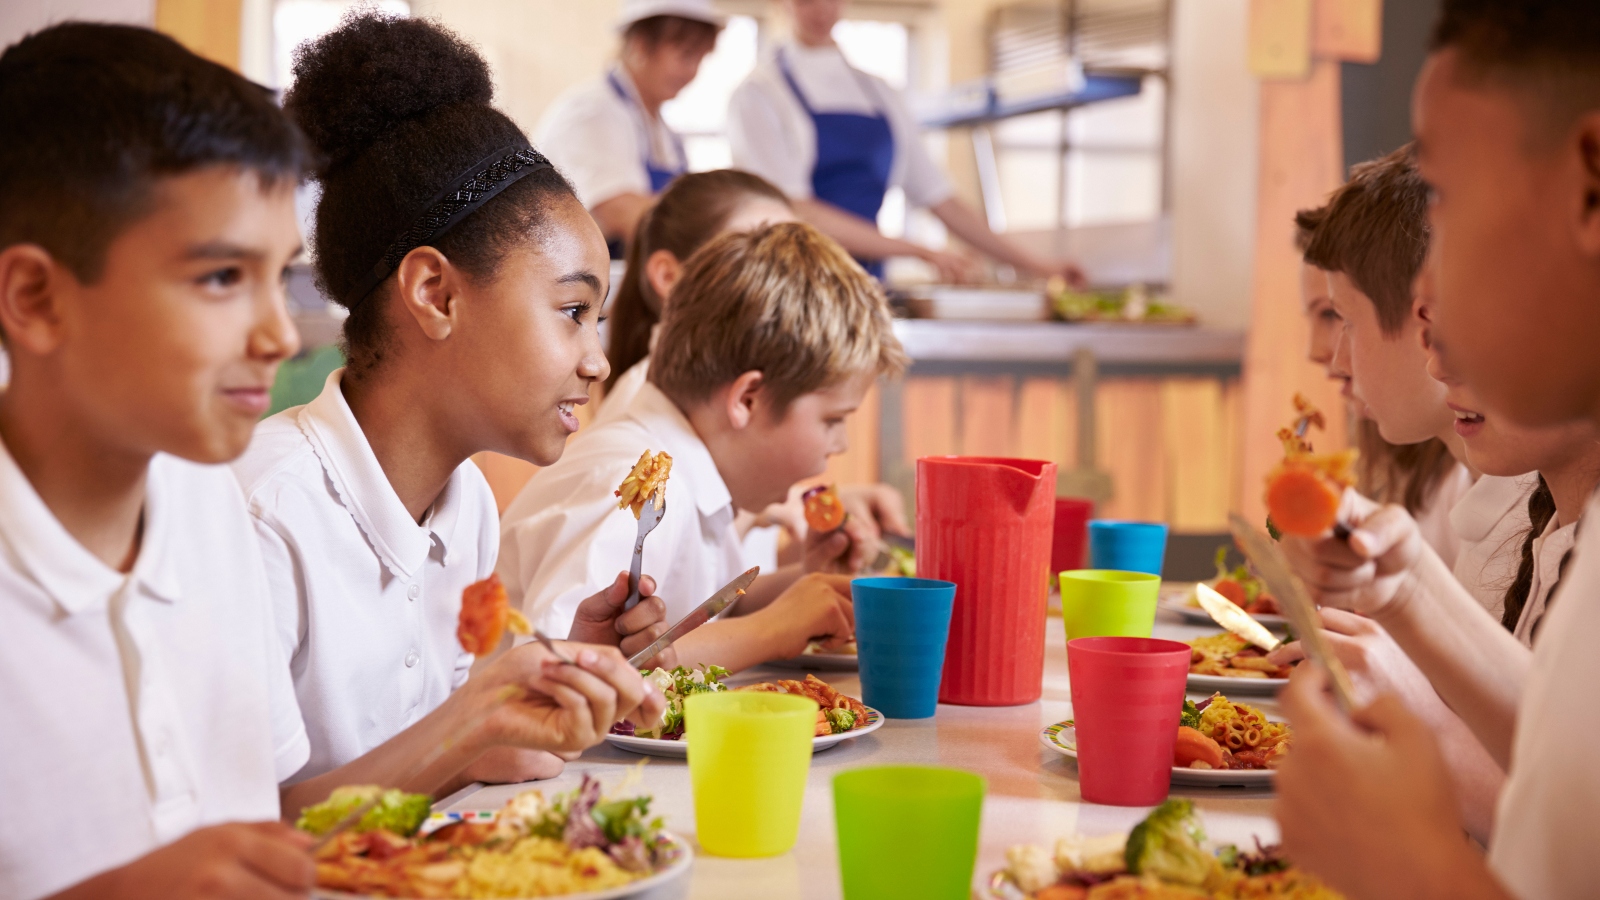 Students eat lunch in school cafeteria